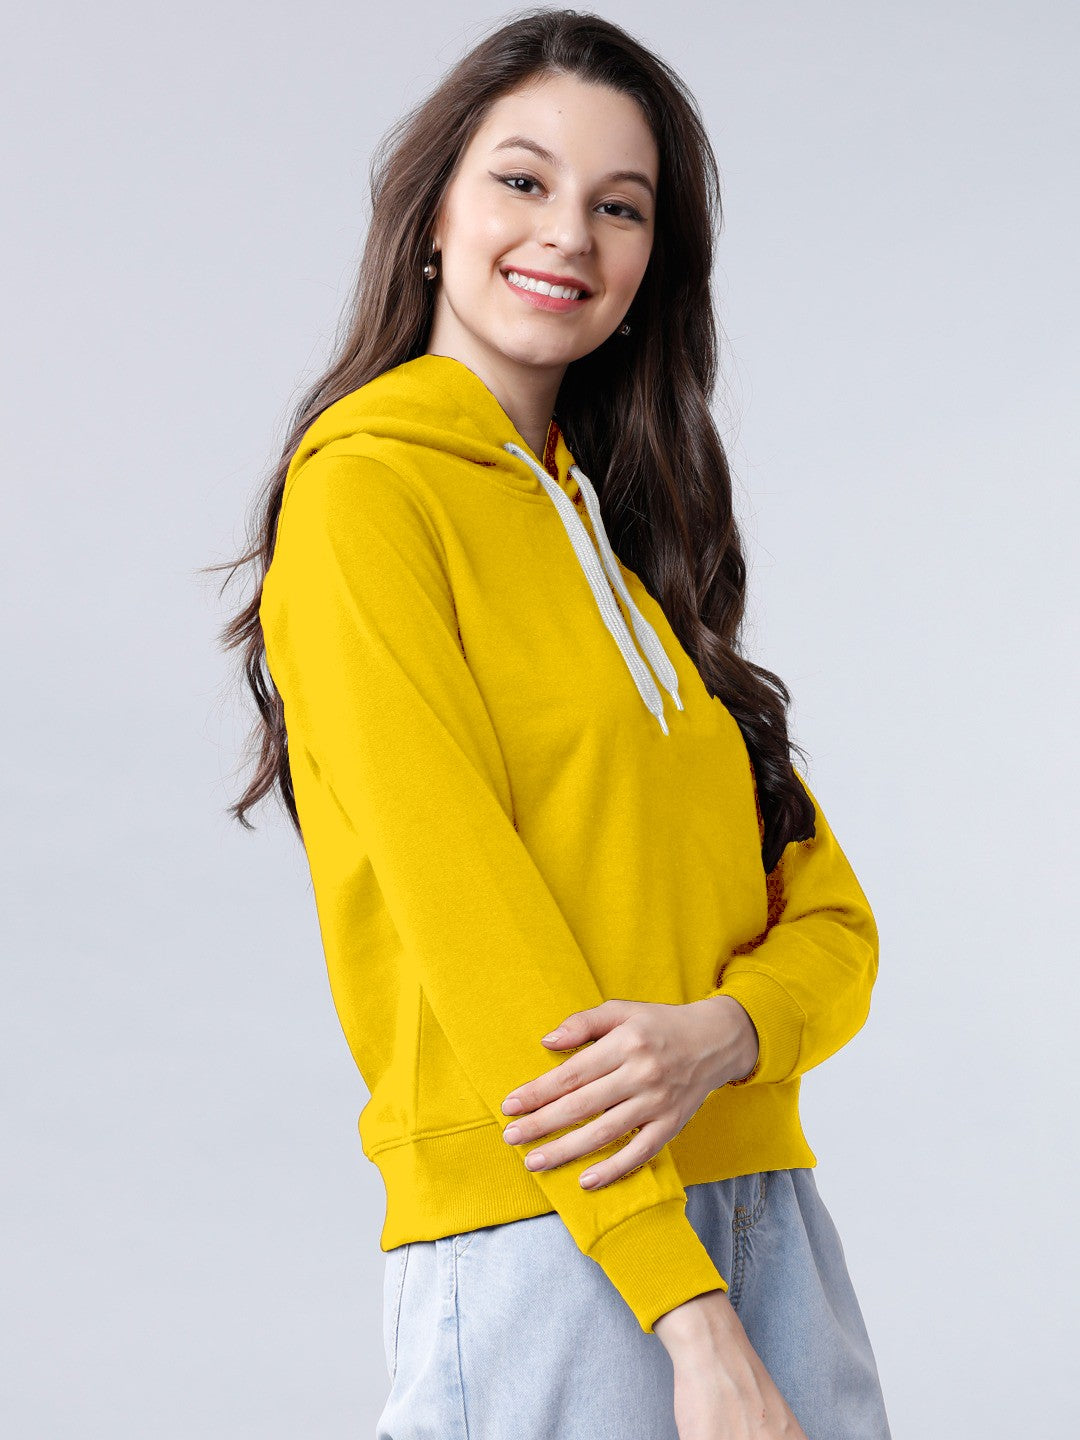 Yellow Colour High Quality Premium Hoodie For Women's